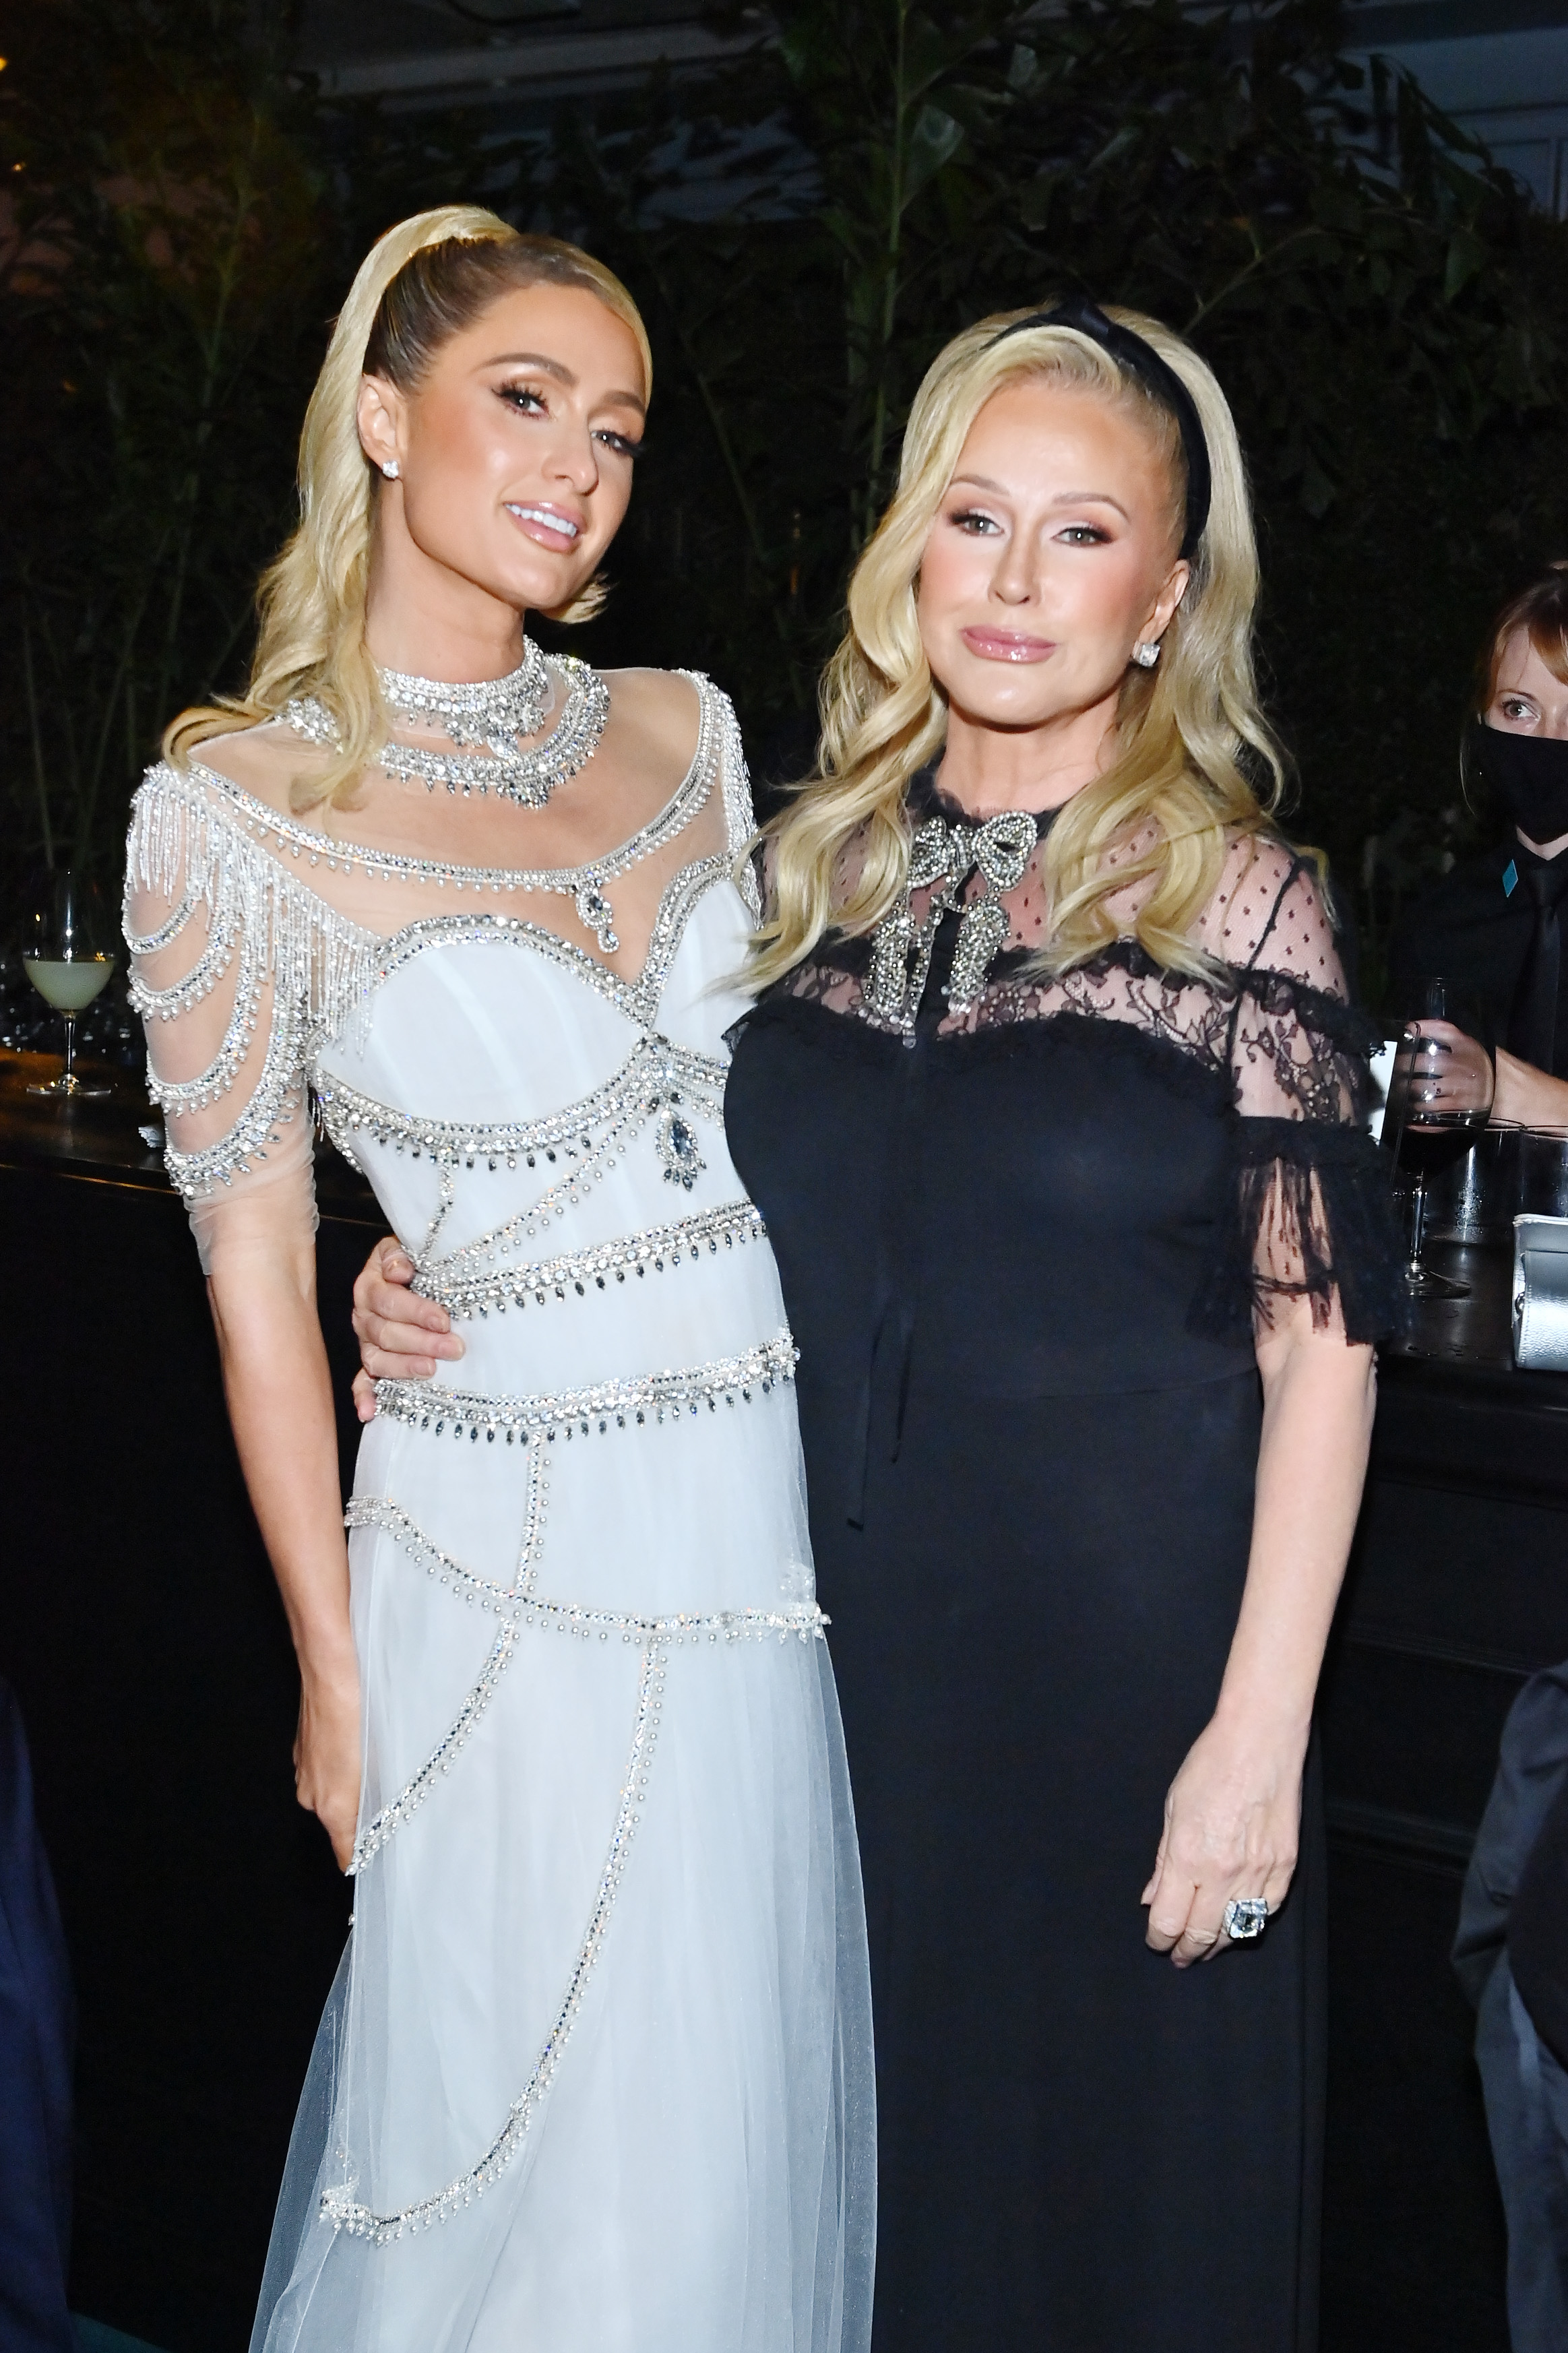 LOS ANGELES, CALIFORNIA - NOVEMBER 06: (L-R) Paris Hilton and Kathy Hilton attend the 10th Annual LACMA ART+FILM GALA honoring Amy Sherald, Kehinde Wiley, and Steven Spielberg presented by Gucci at Los Angeles County Museum of Art on November 06, 2021 in Los Angeles, California. 